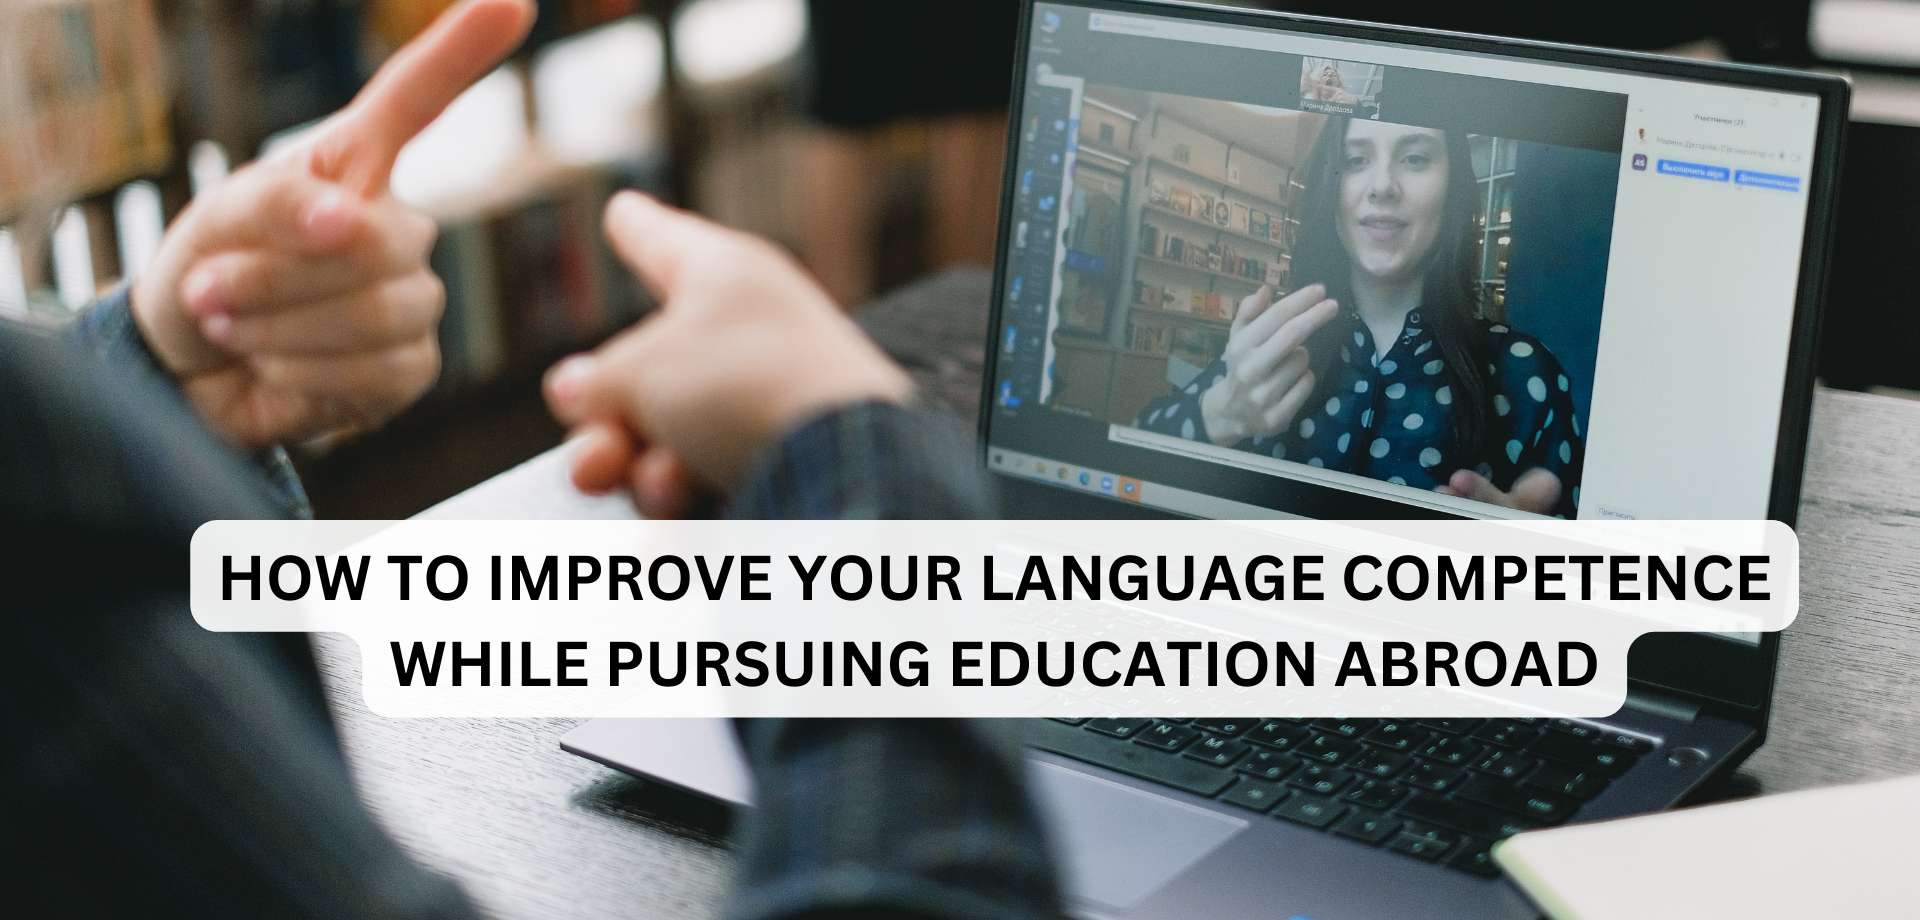 How to Improve Your Language Competence While Pursuing Education Abroad